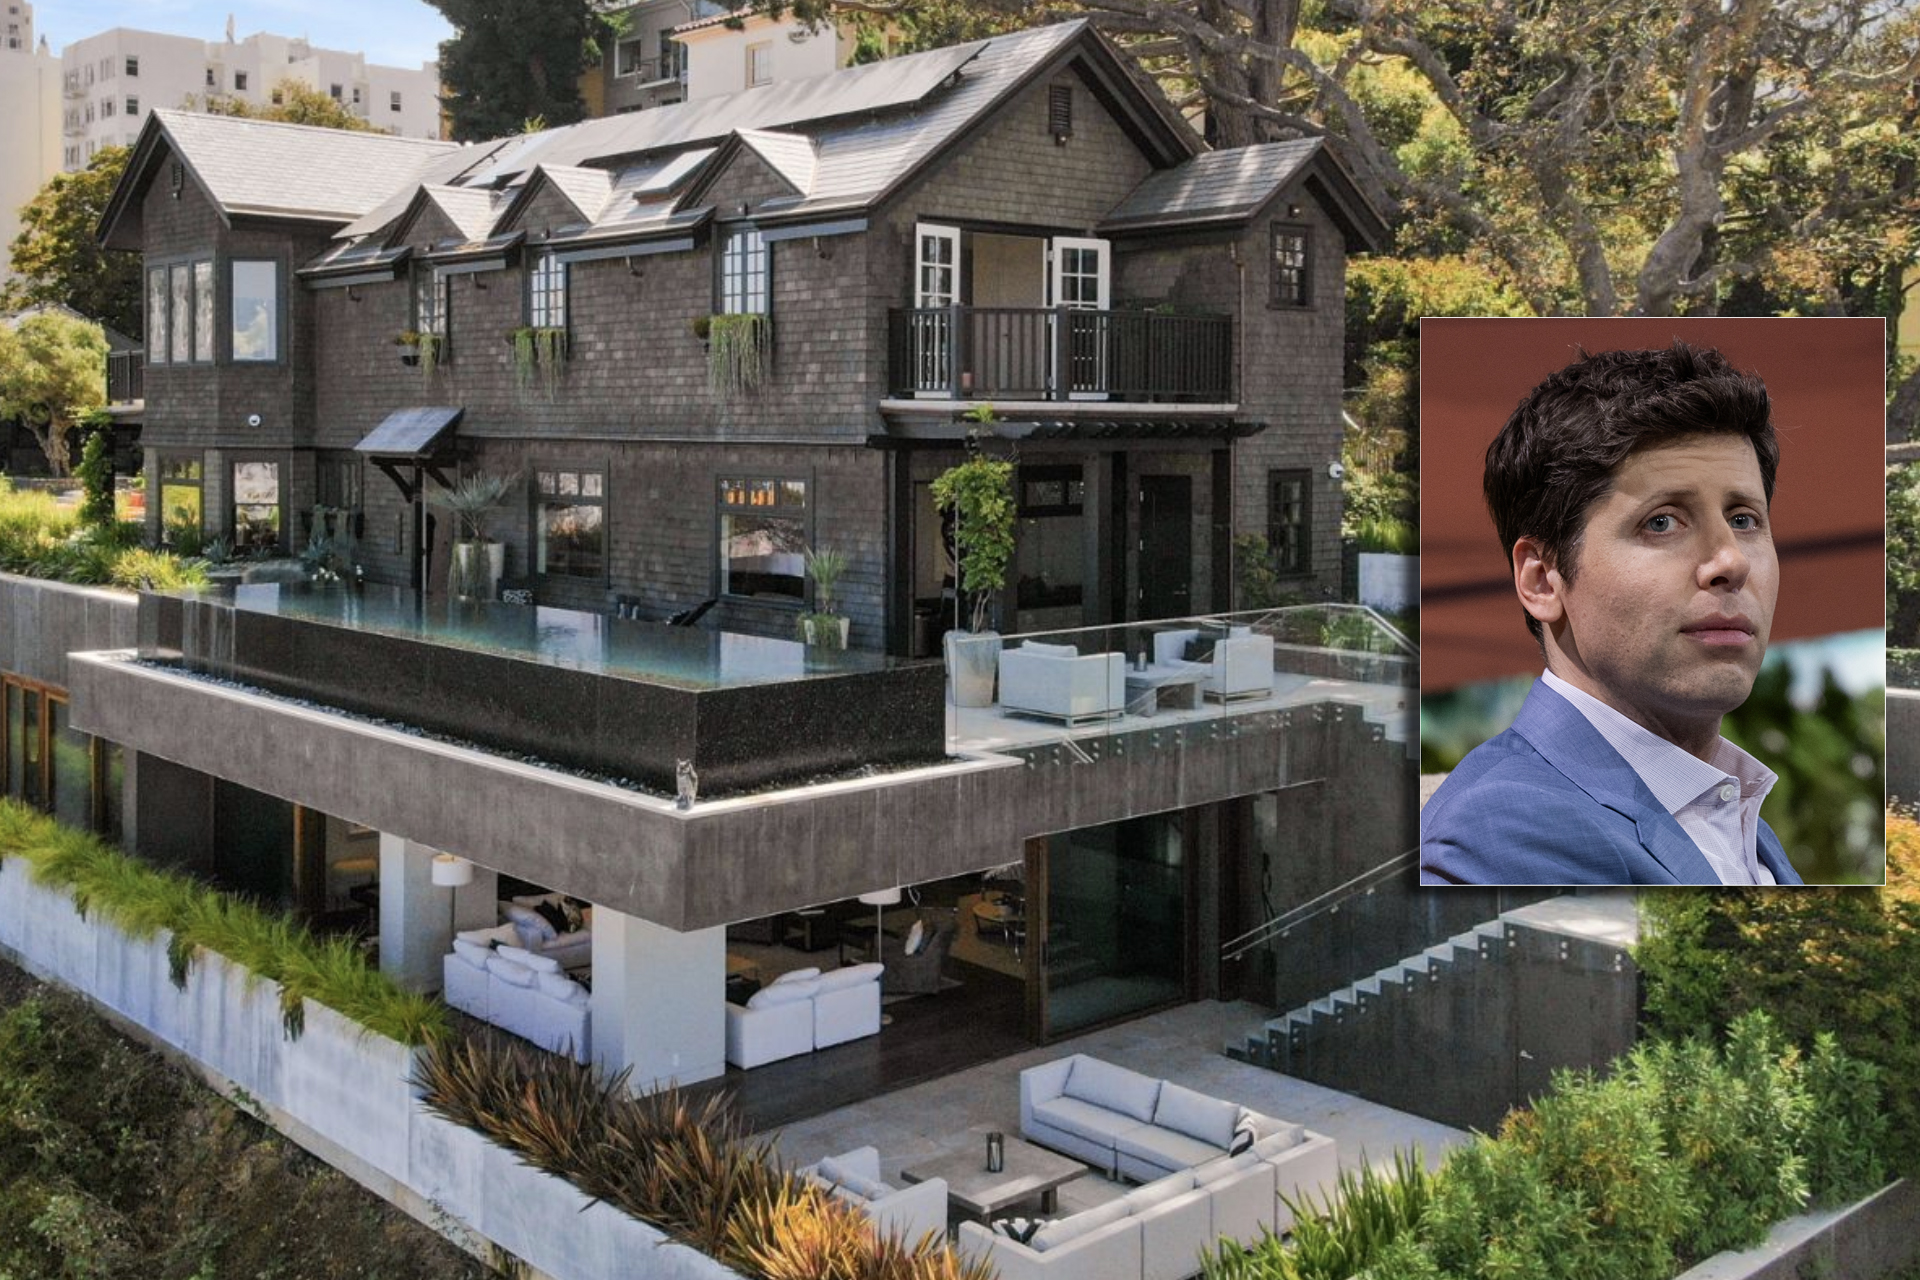 The image shows a large, modern house with a multi-tiered design and pool on an upper terrace. Inset is a headshot of a person with short dark hair wearing a blue jacket.